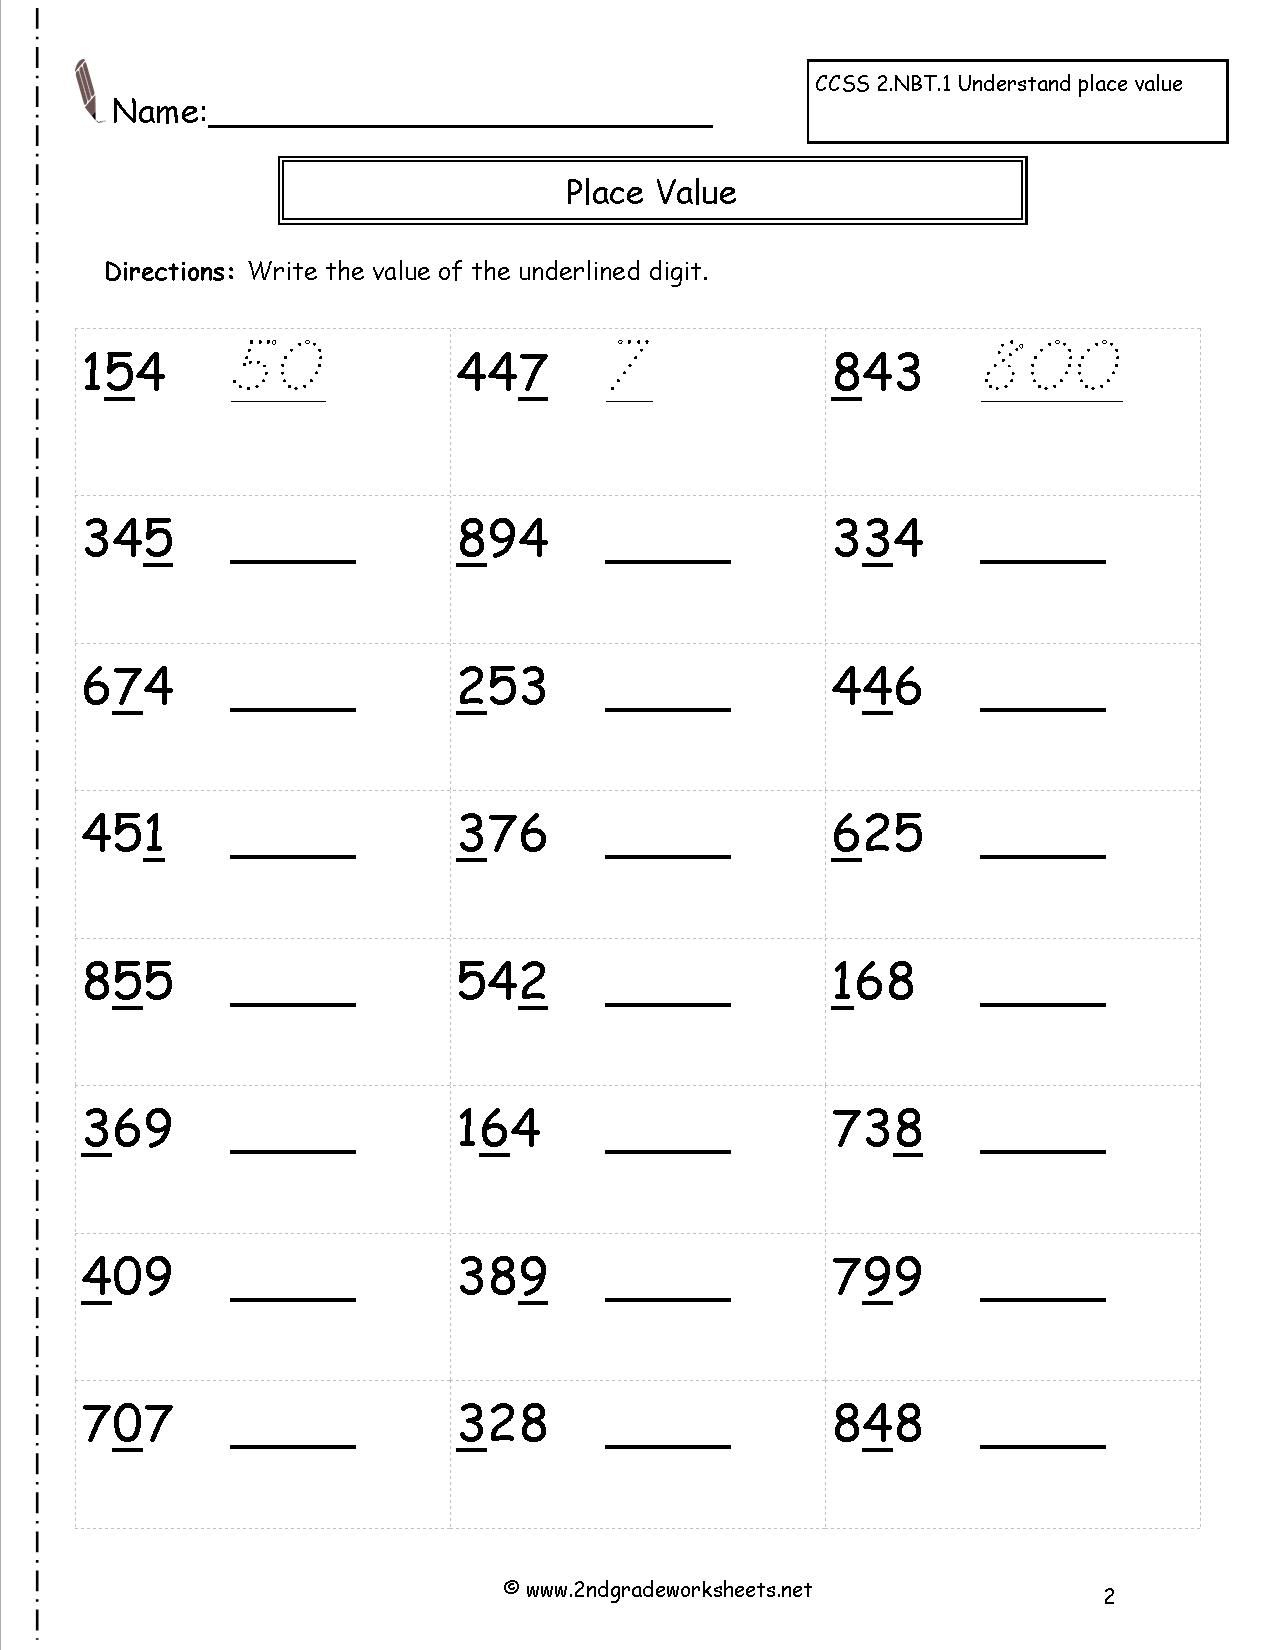 Place Value Worksheets Second Grade | Place Value Worksheet | Places | Place Value Worksheets 2Nd Grade Printable